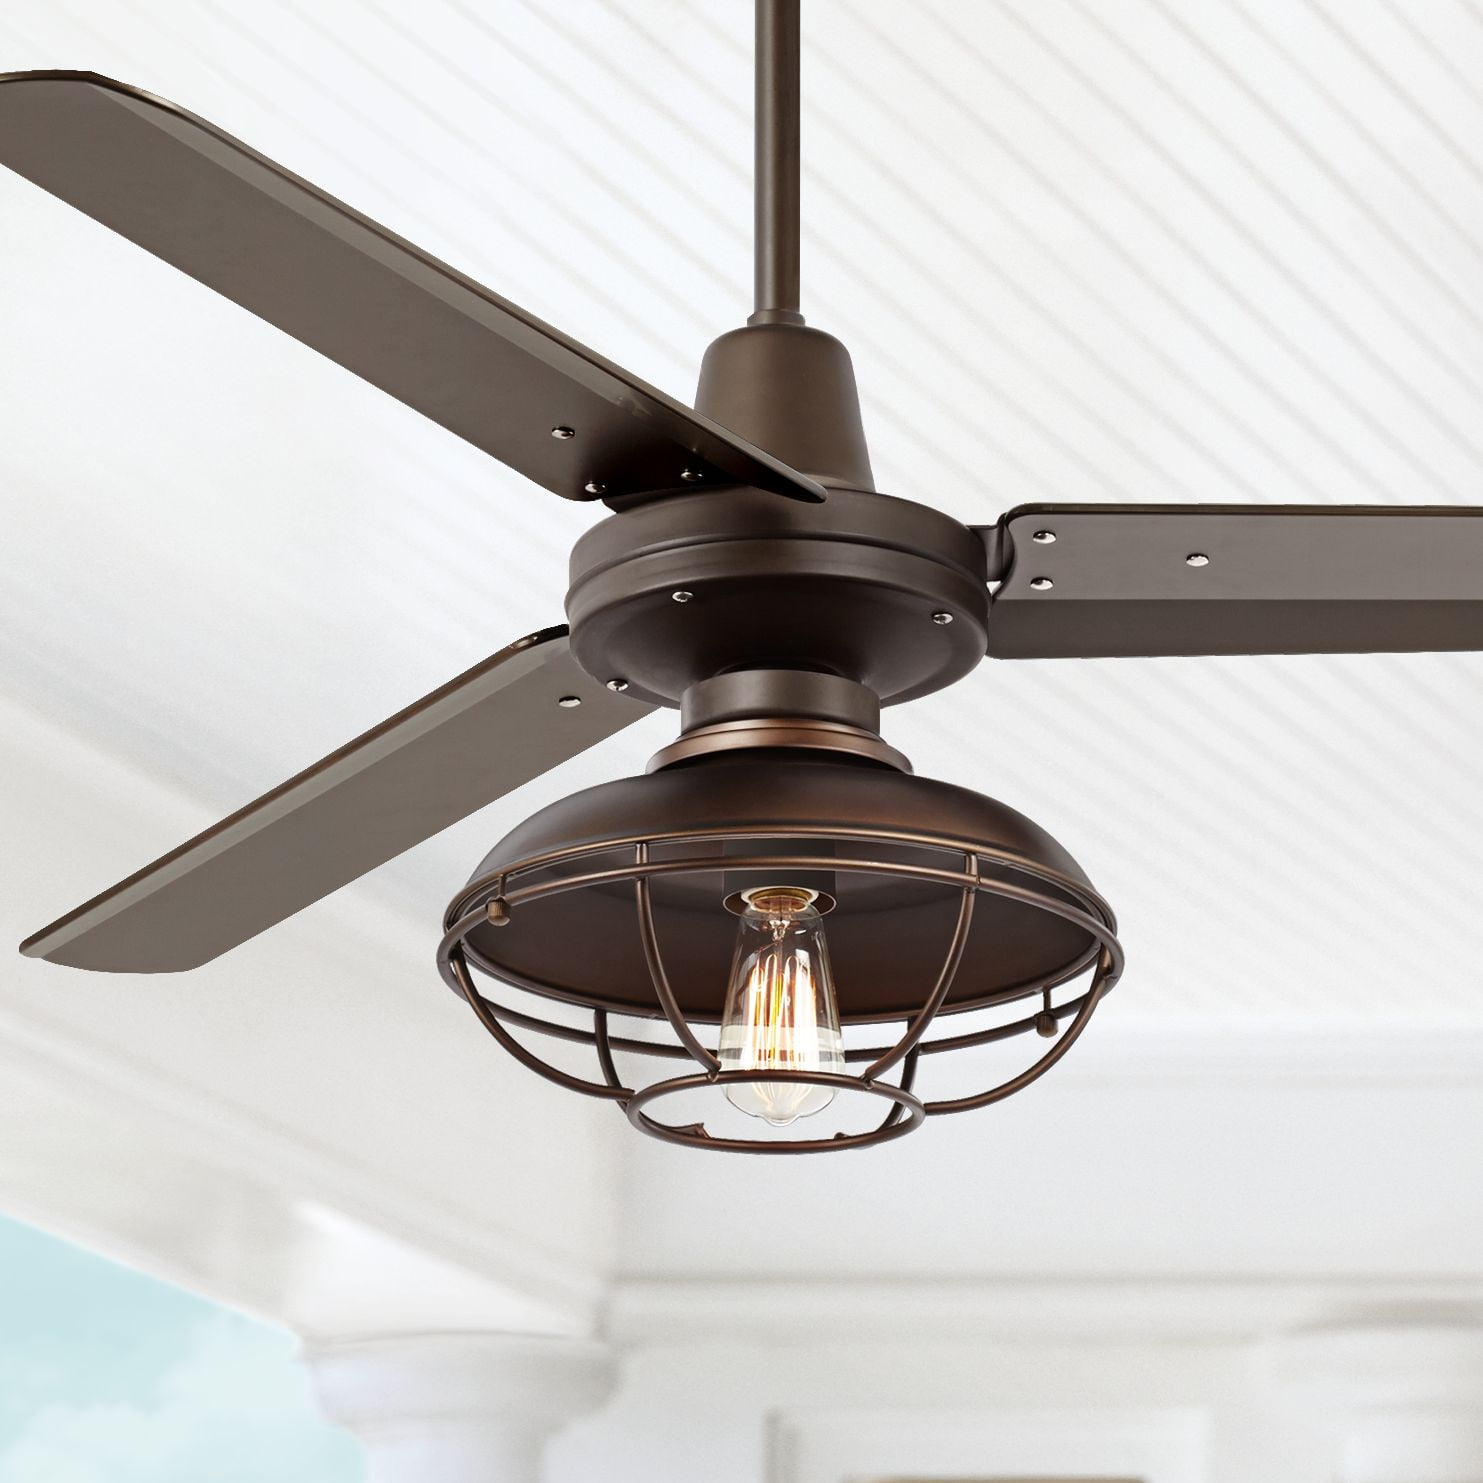 52" Casa Vieja Industrial Outdoor Ceiling Fan with Light ...